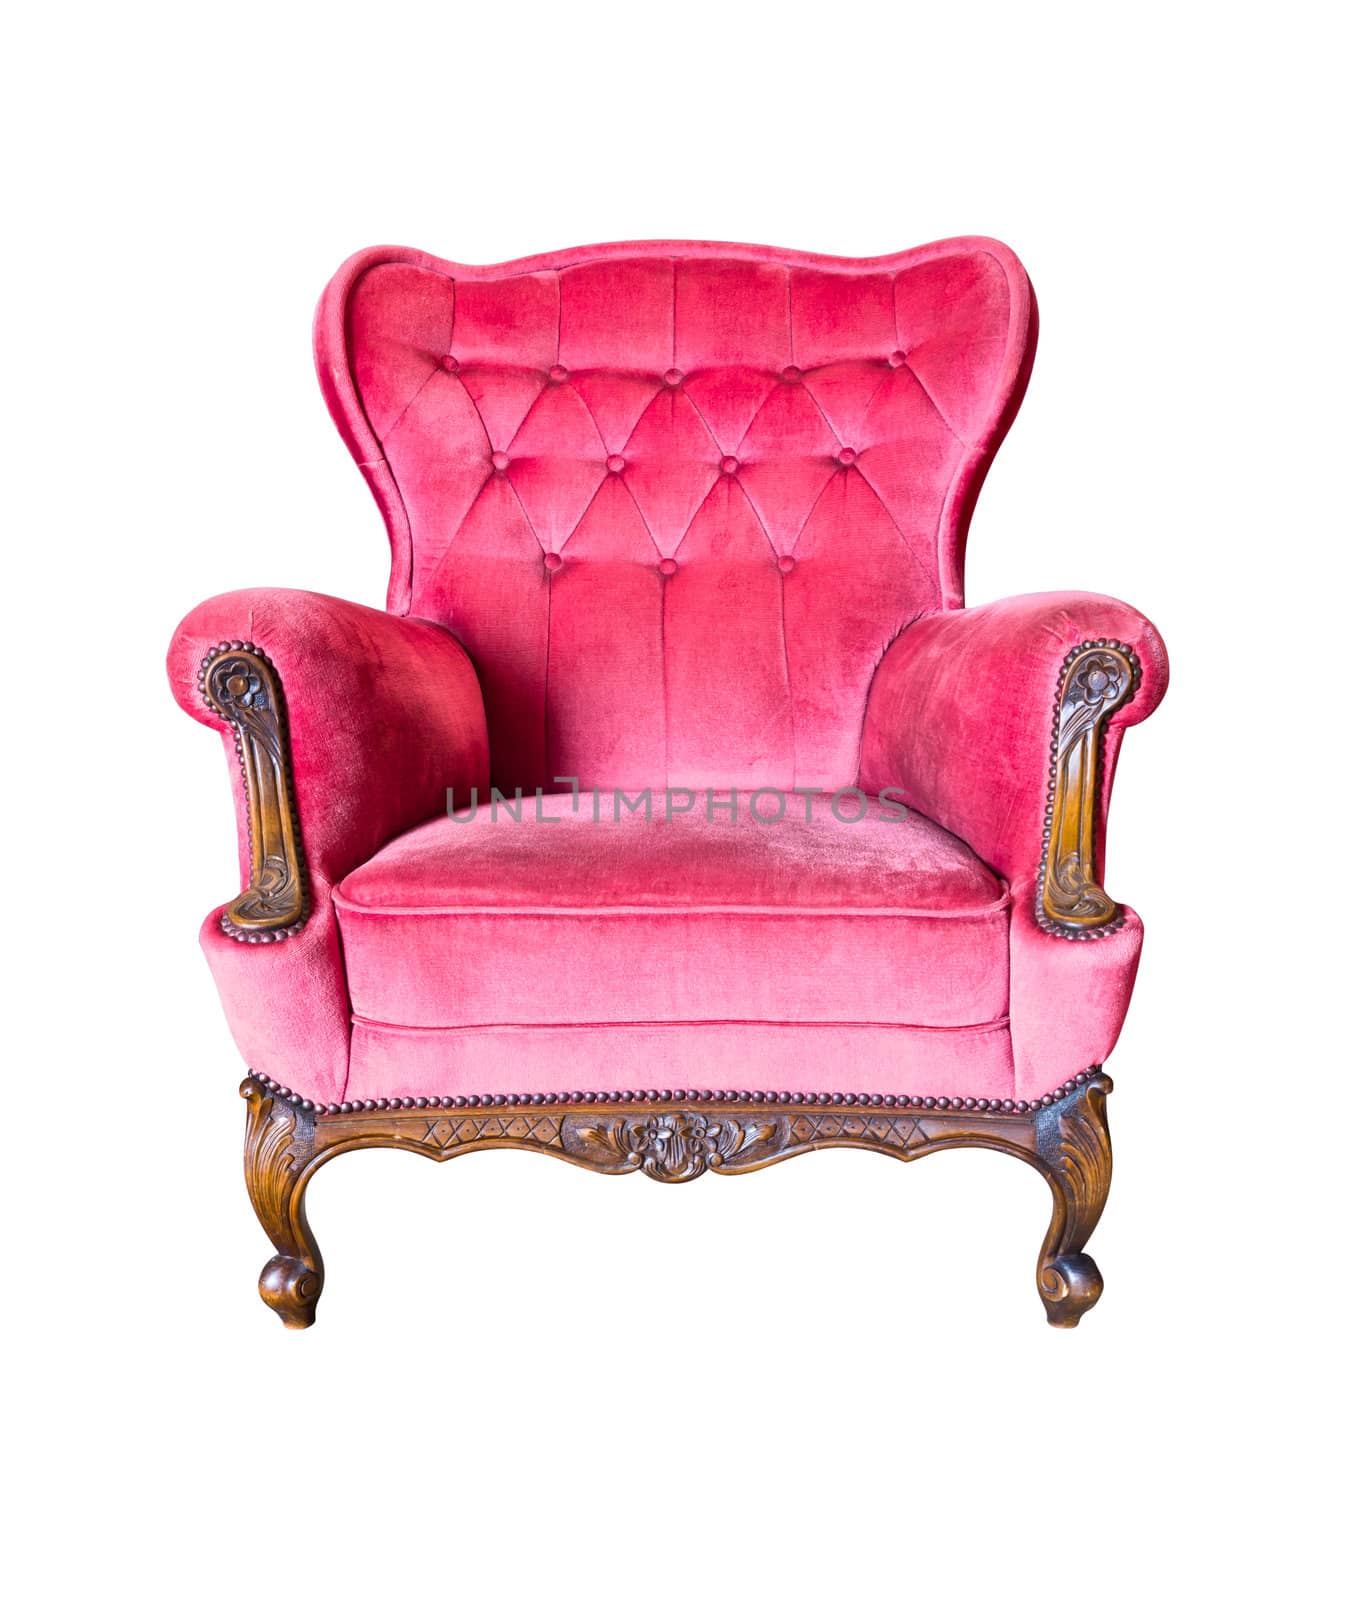 vintage red luxury armchair isolated with clipping path by tungphoto